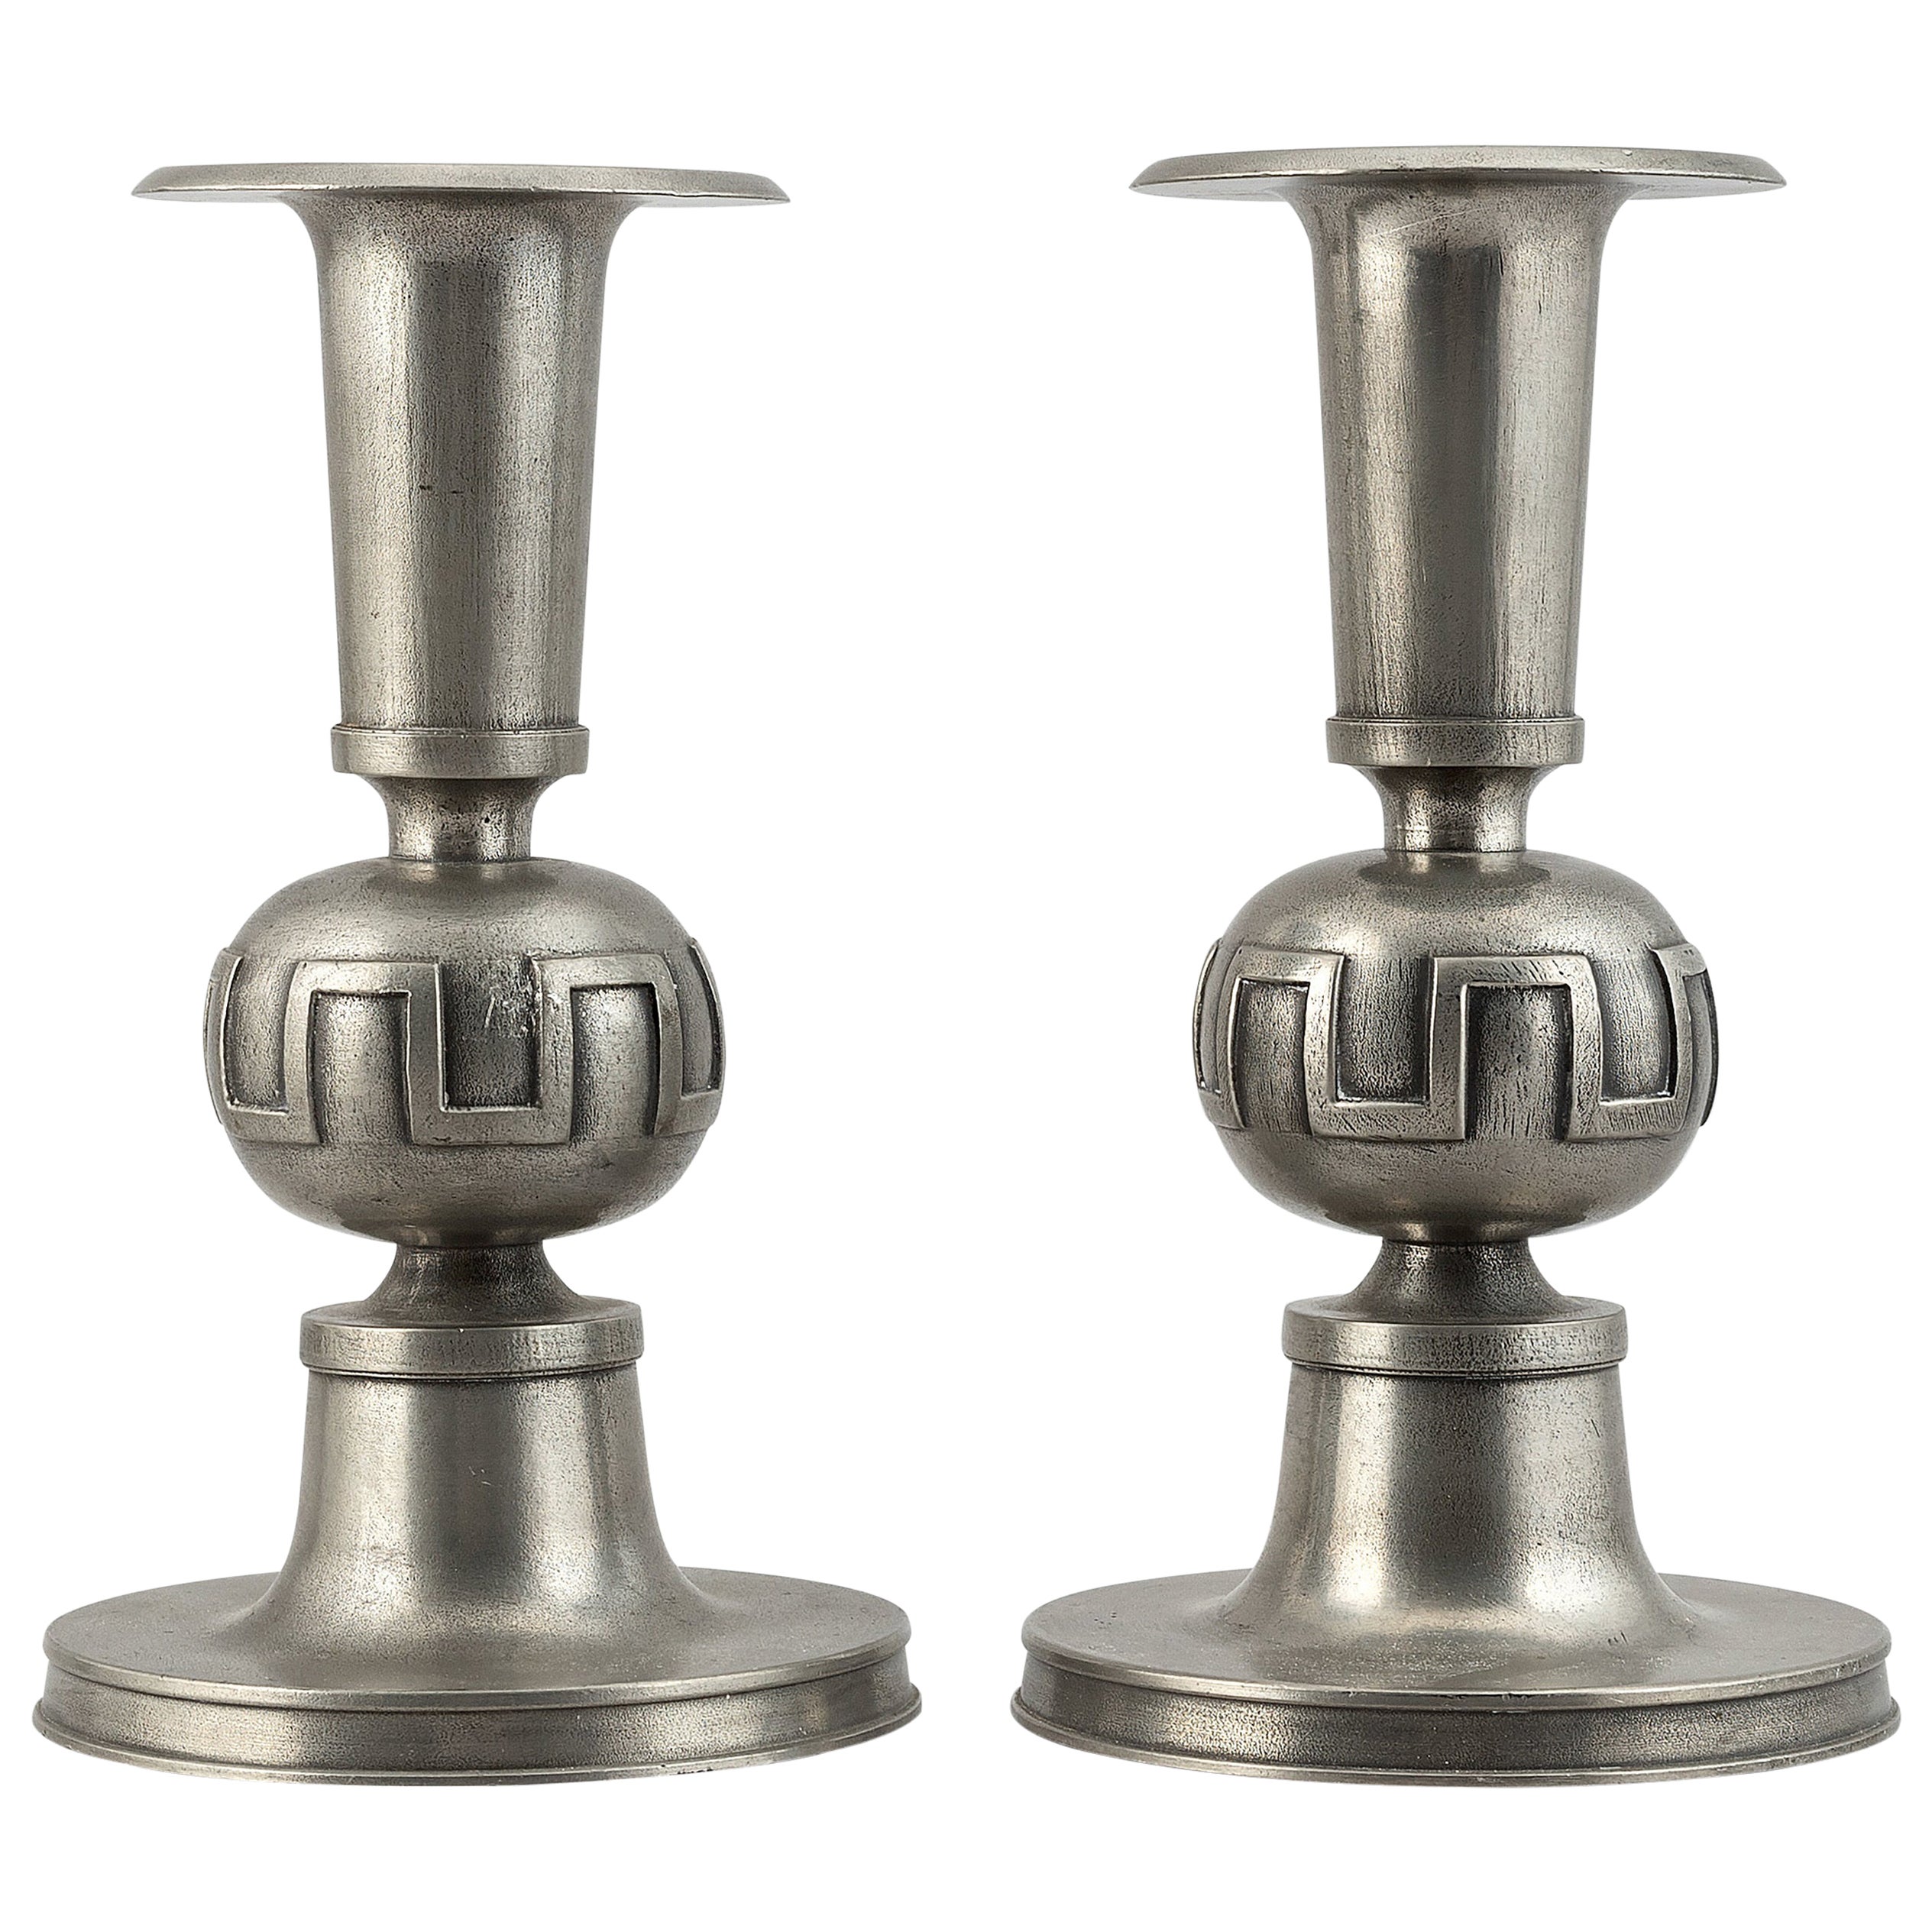 Pair of Swedish Modern Pewter Candlesticks, Edwin Ollers, 1952 For Sale